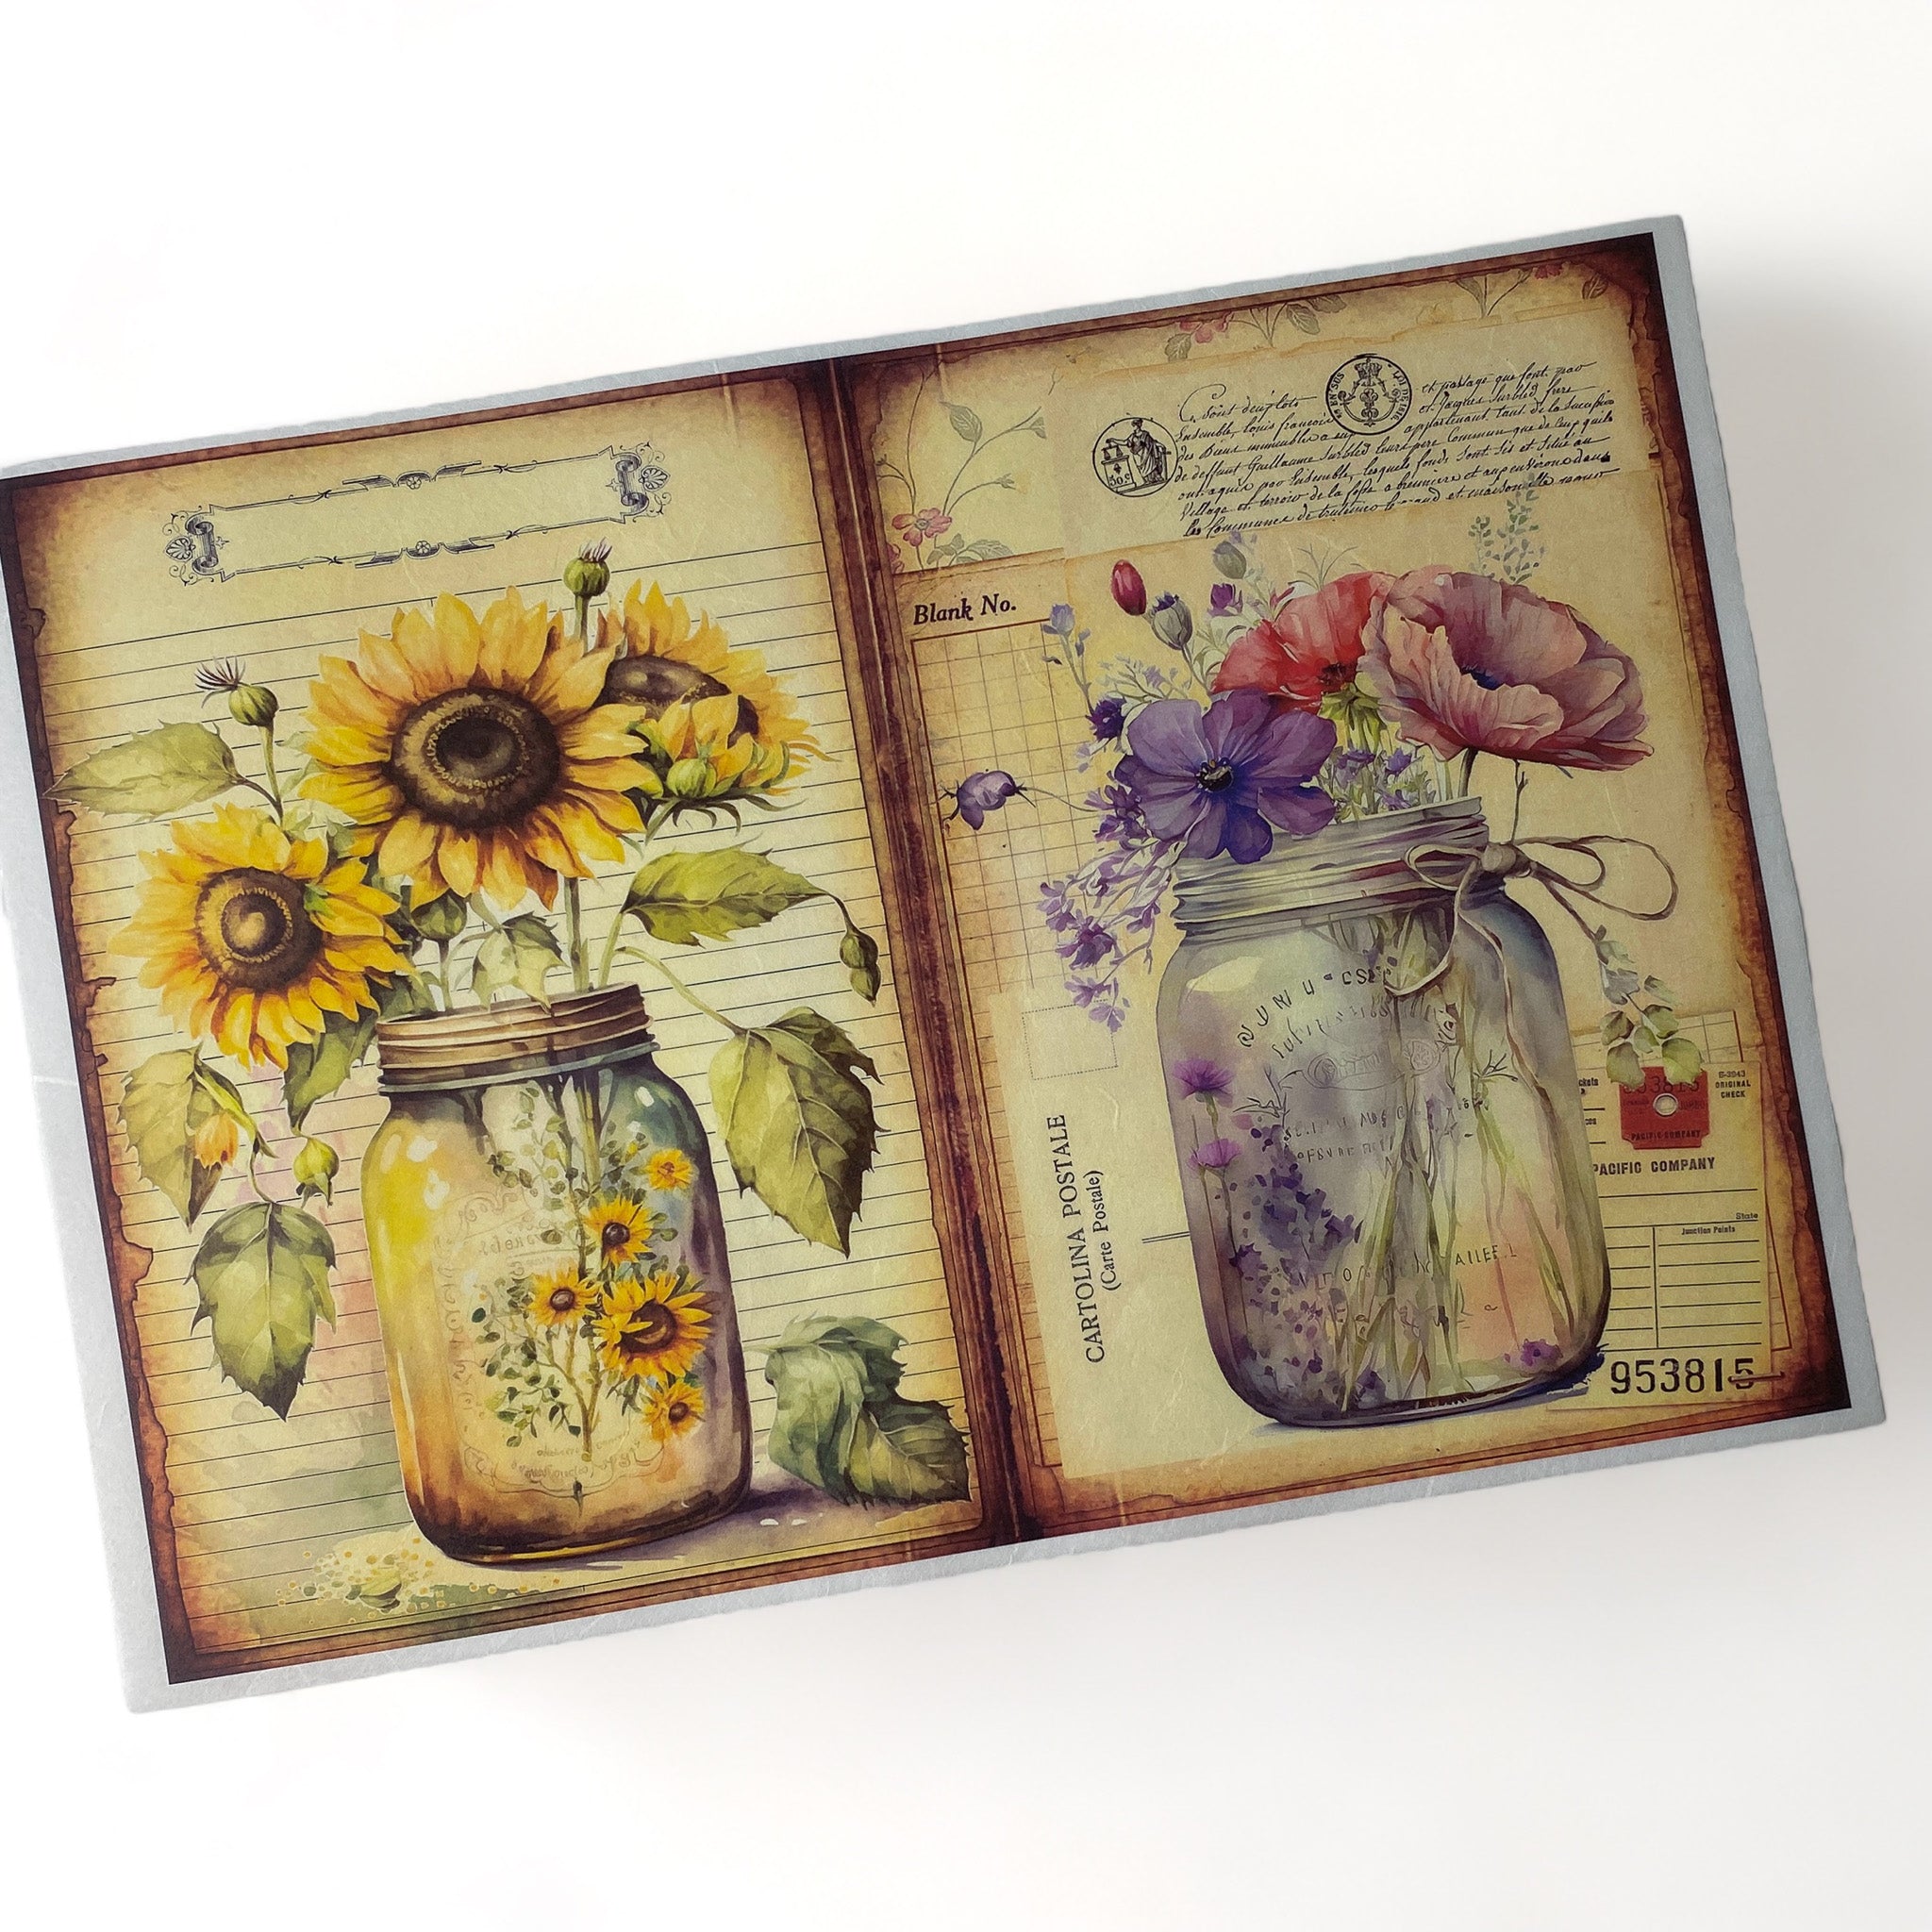 A4 rice paper design that features two charming images of flowers in vintage mason jars against old documents, one with sunflowers and the other with wildflowers is against a white background.